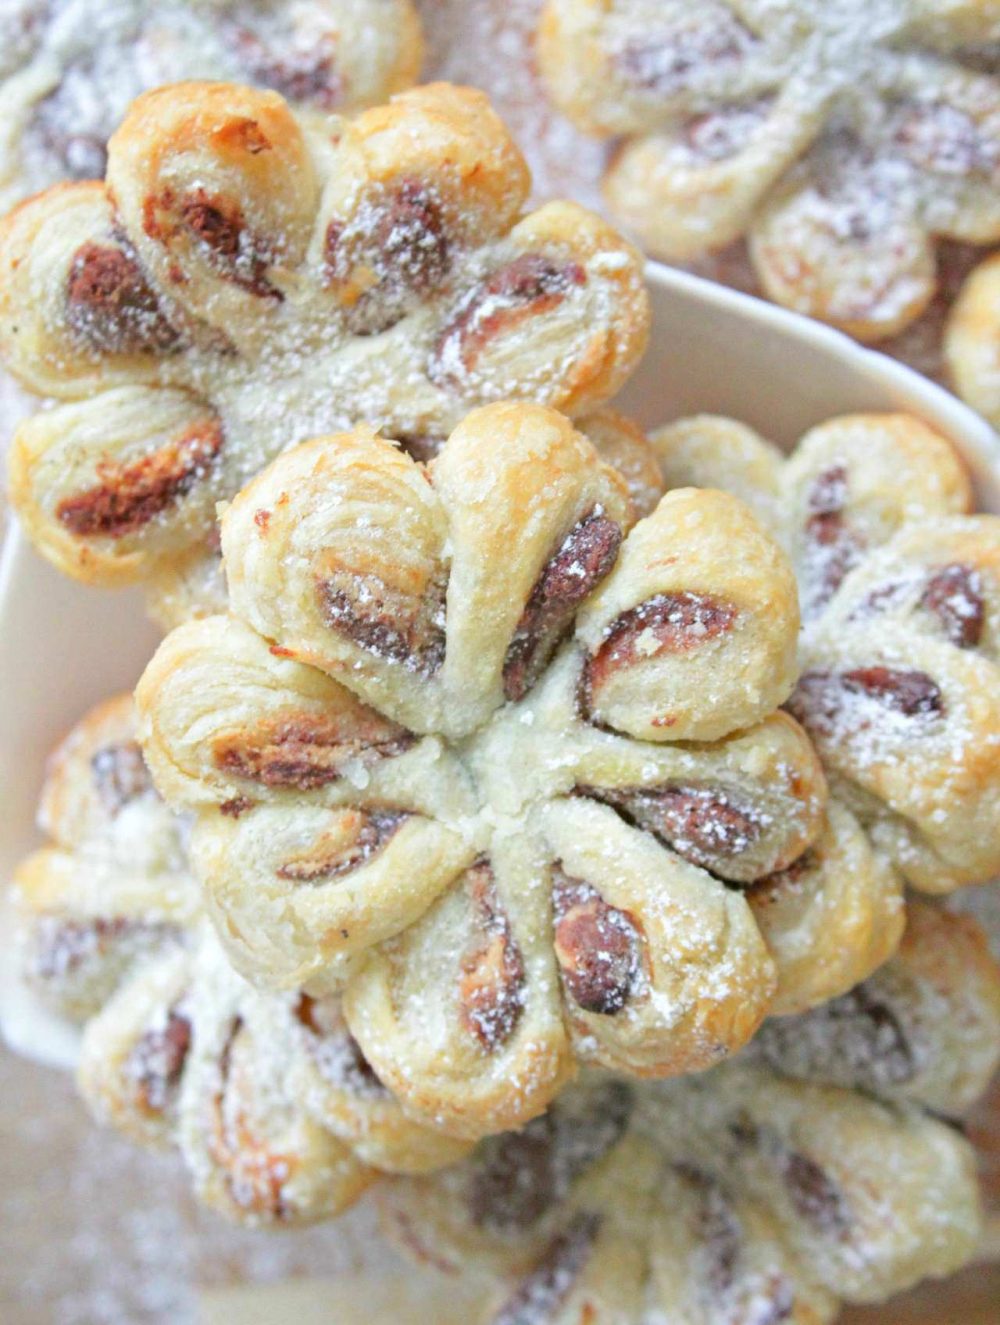 Pastry flowers with nutella and peanut butter